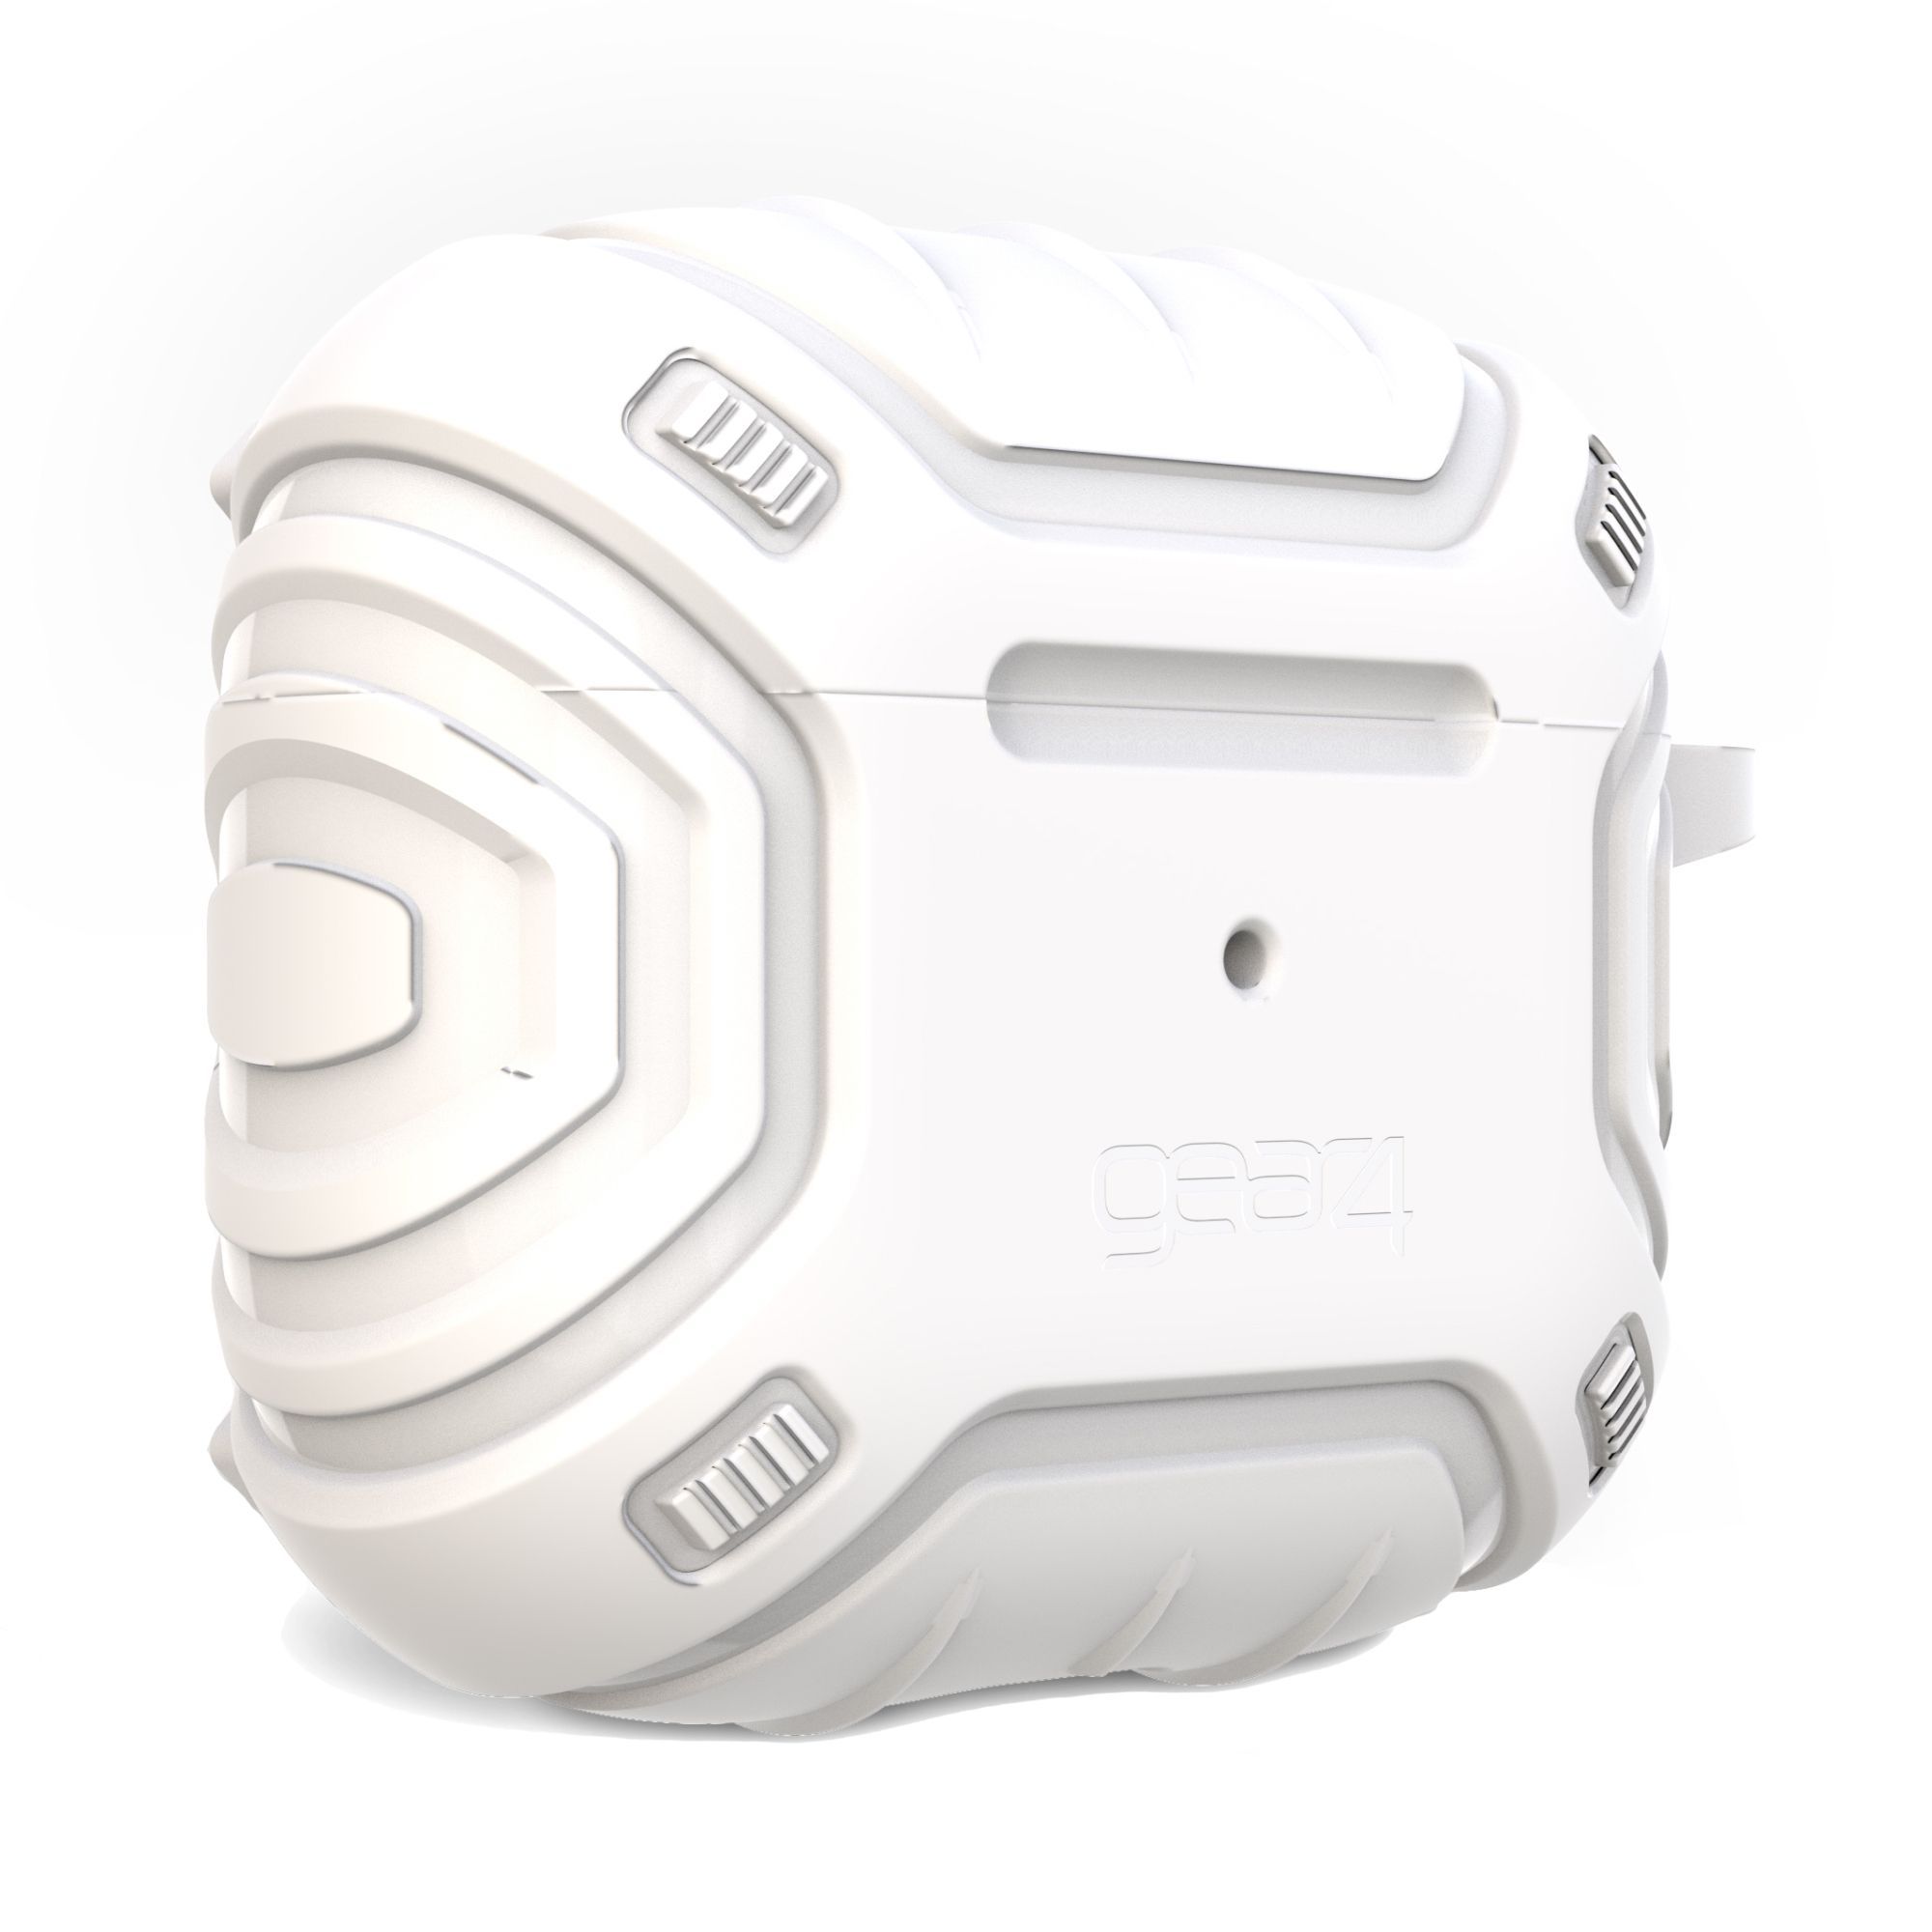 Apollo Snap AirPods Case for AirPods (3rd Generation)